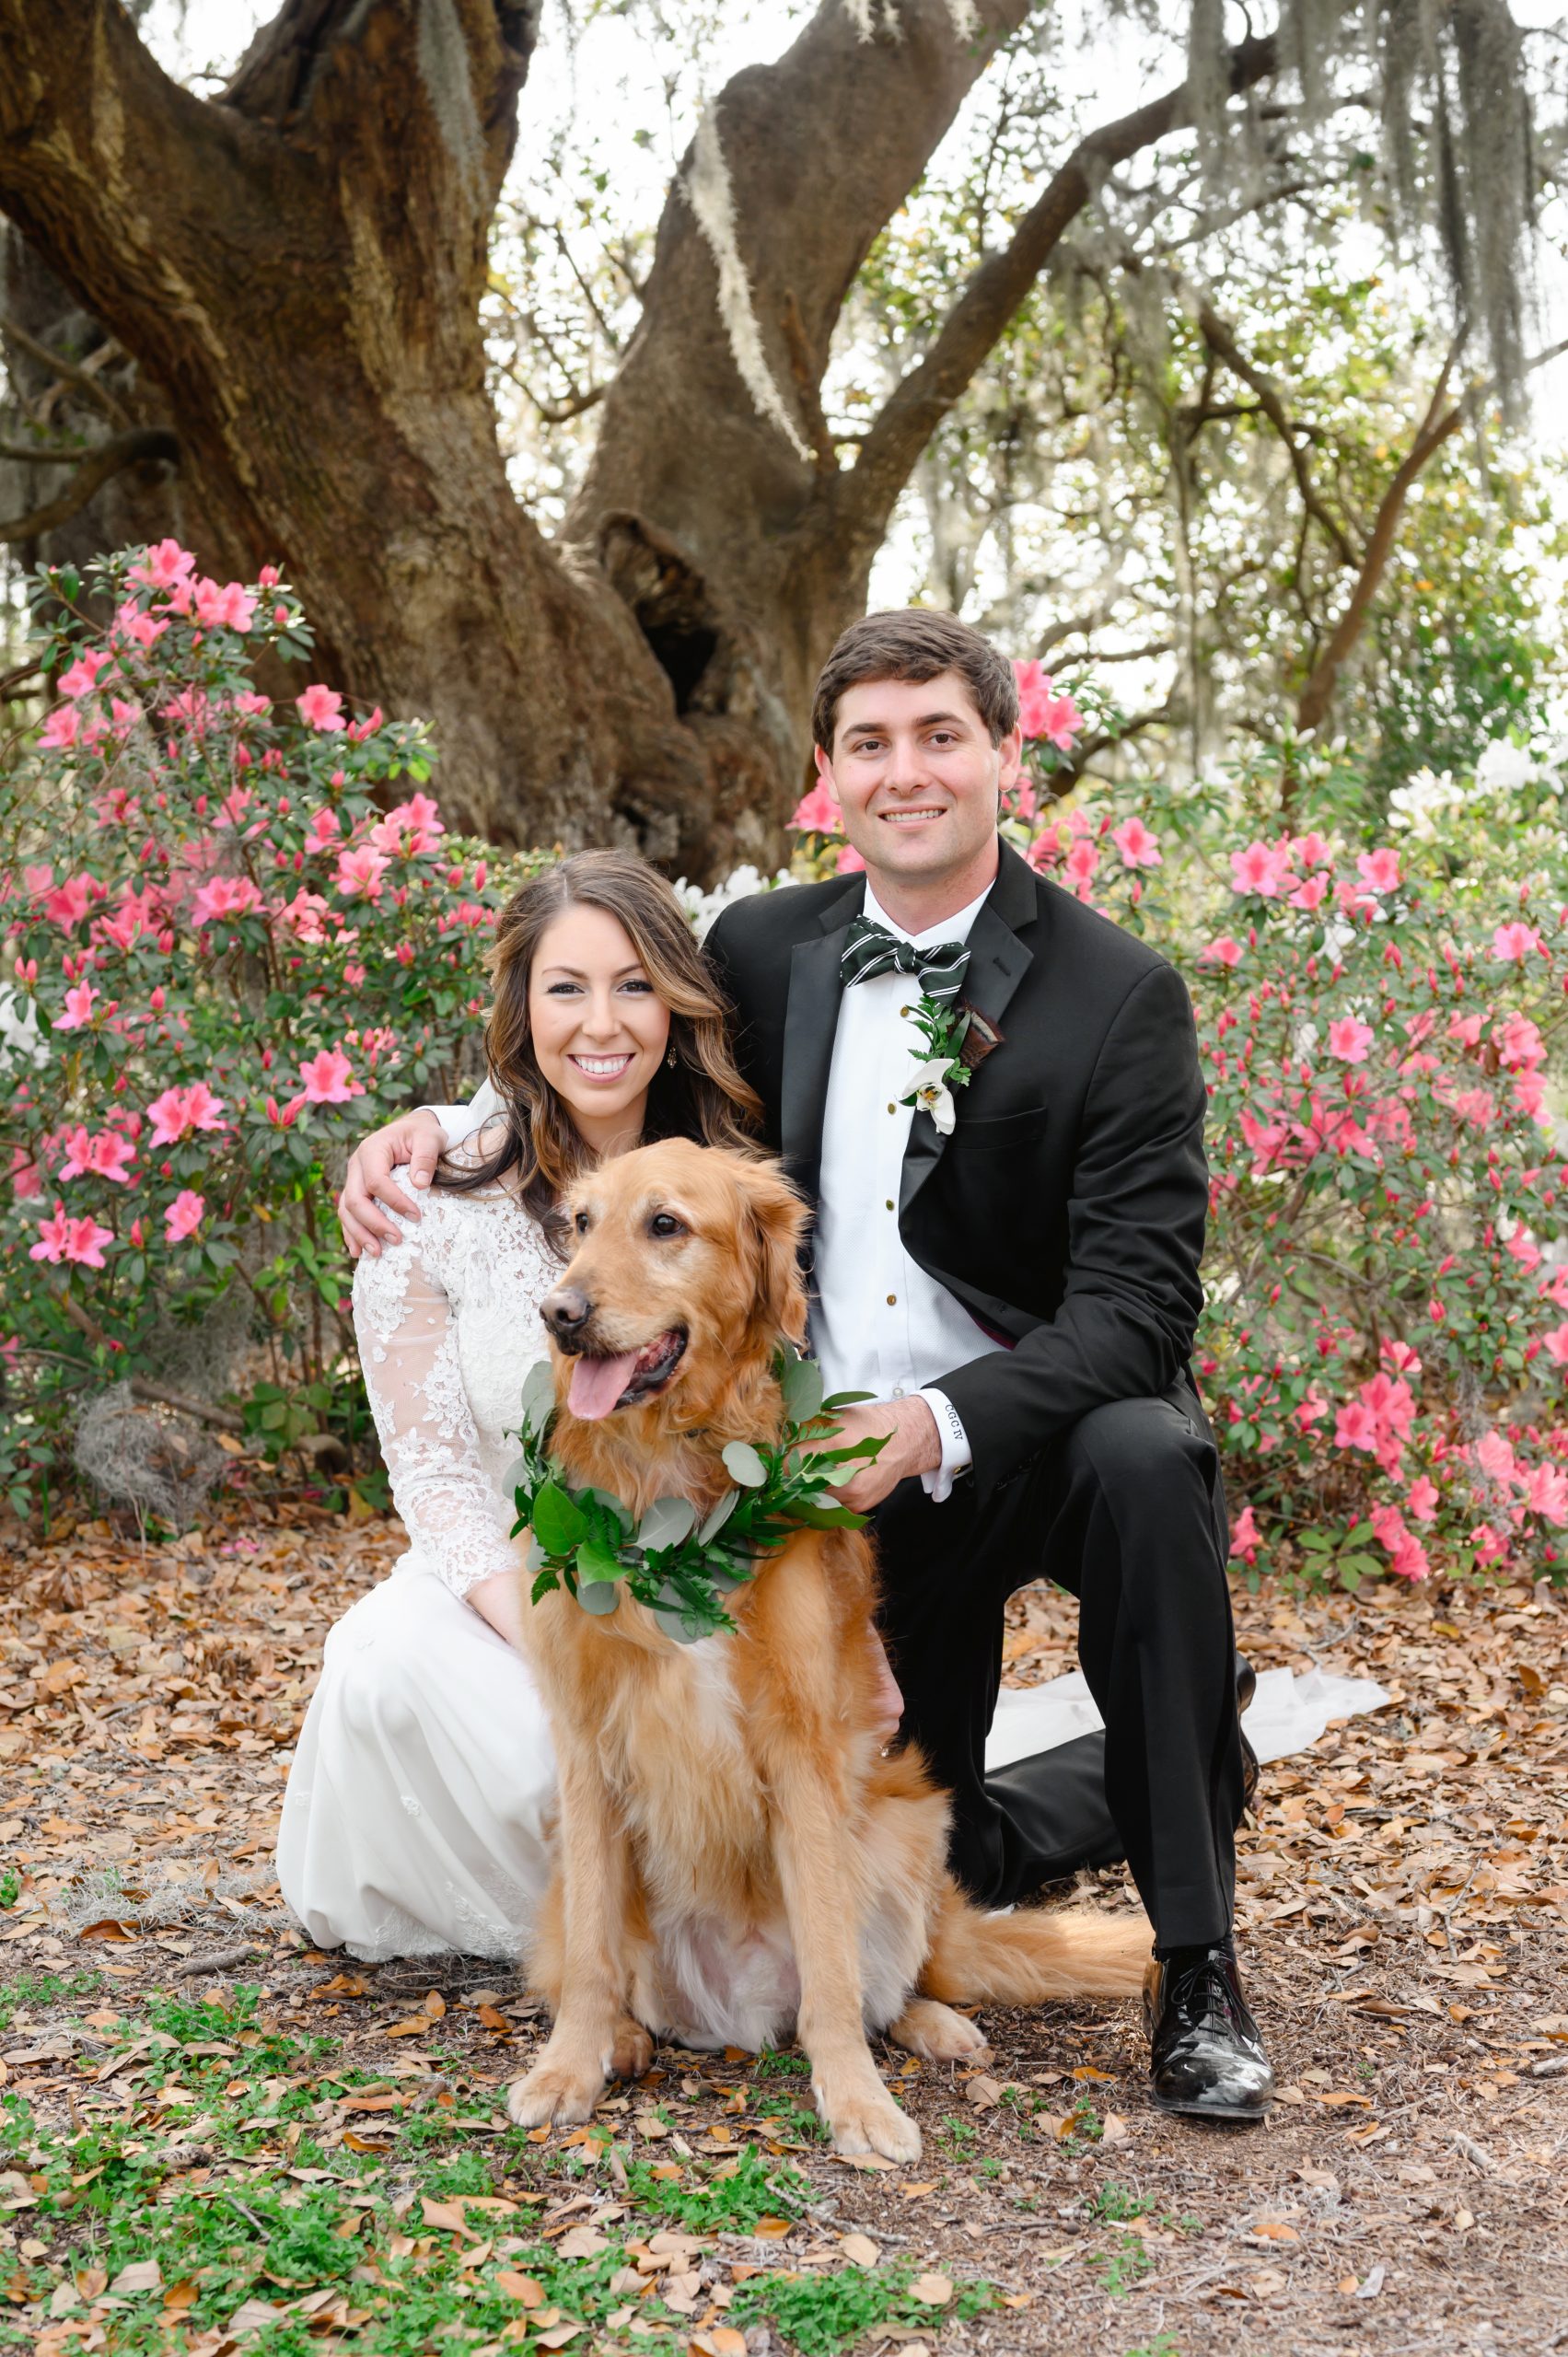 The March 14 wedding venue for Kristy Greenfield and Guy Castles was the lovely Boone Hall Plantation in Charleston. In attendance was Kristy’s beloved dog, Dawson, who has been there since the beginning of their romance. The couple was fortunate to slip in a weeklong honeymoon to St. Lucia just before the COVID-19 shutdowns ensued. Photography by Priscilla Thomas Photography 